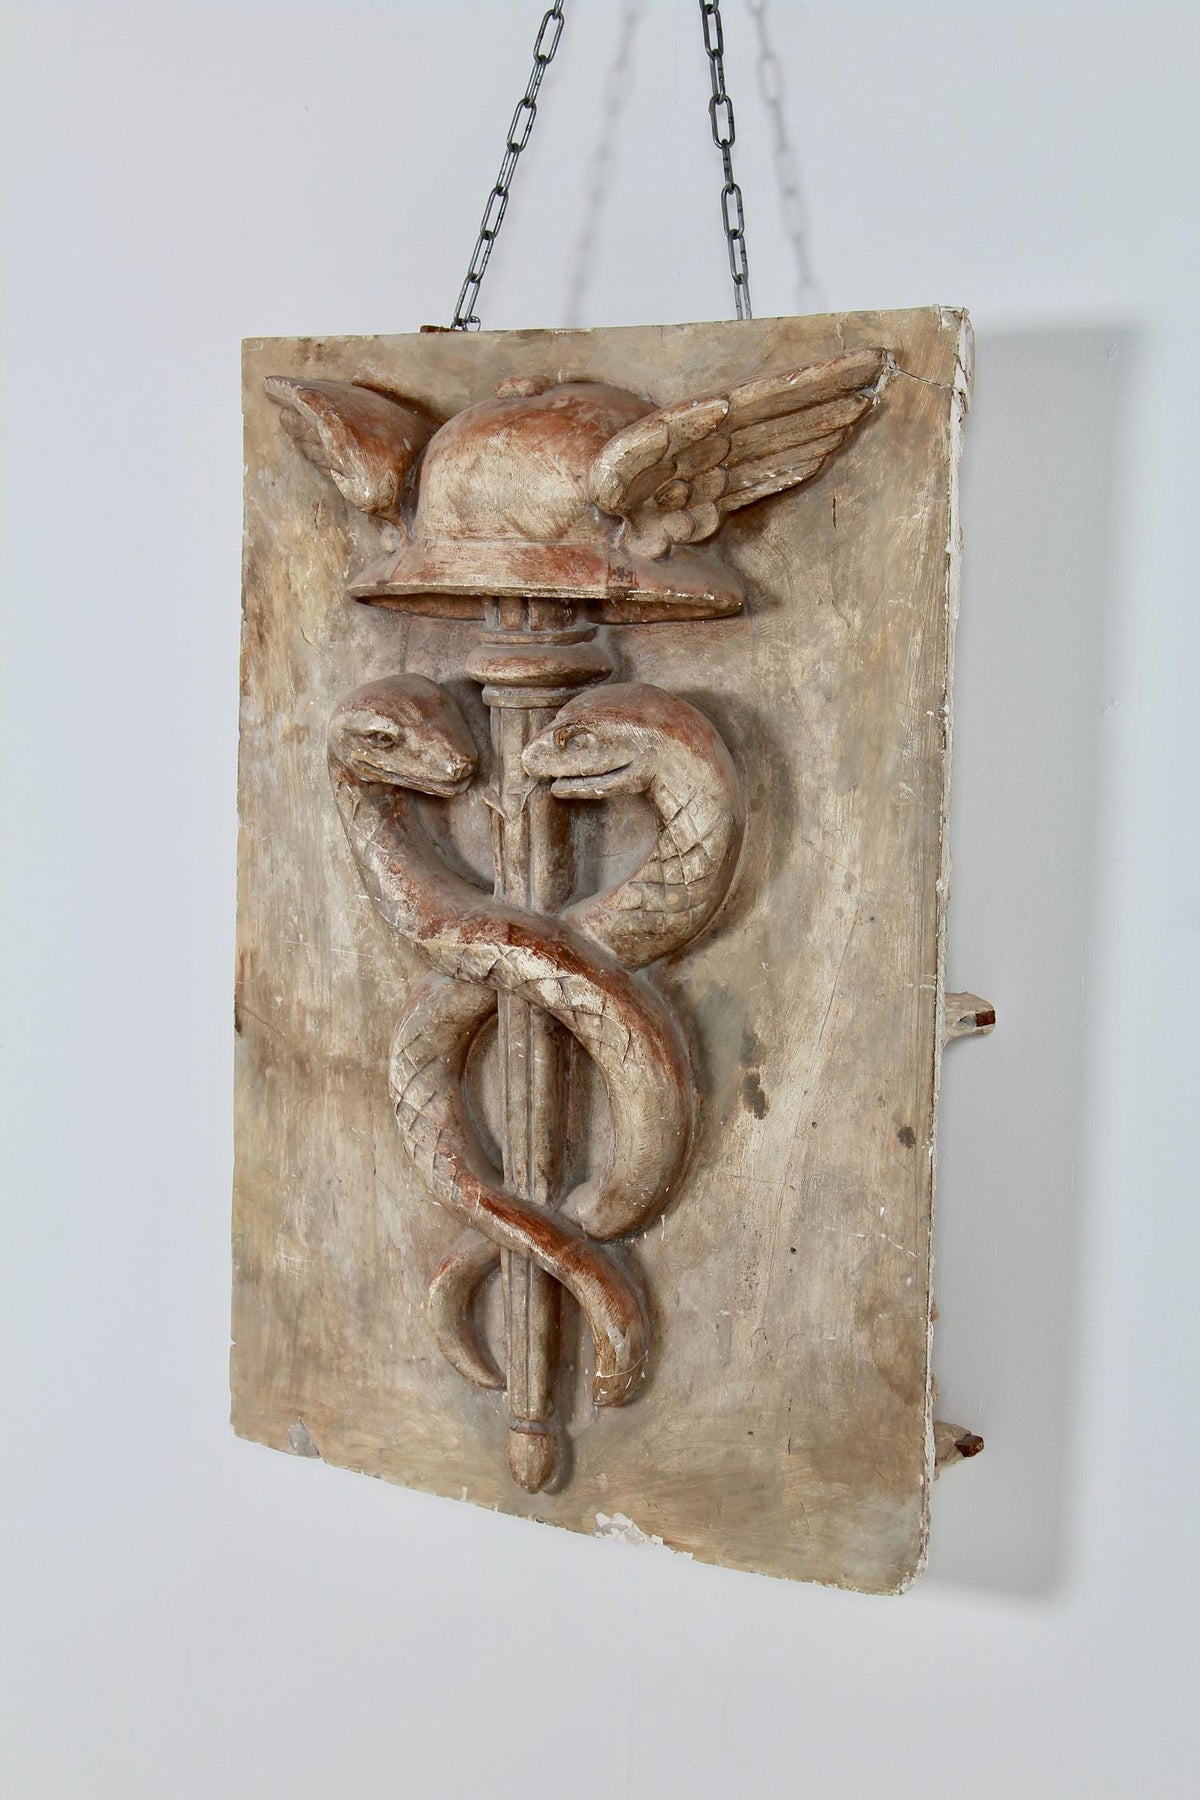 Decorative French Caduceus Plaster Plaque Hermes and Snakes